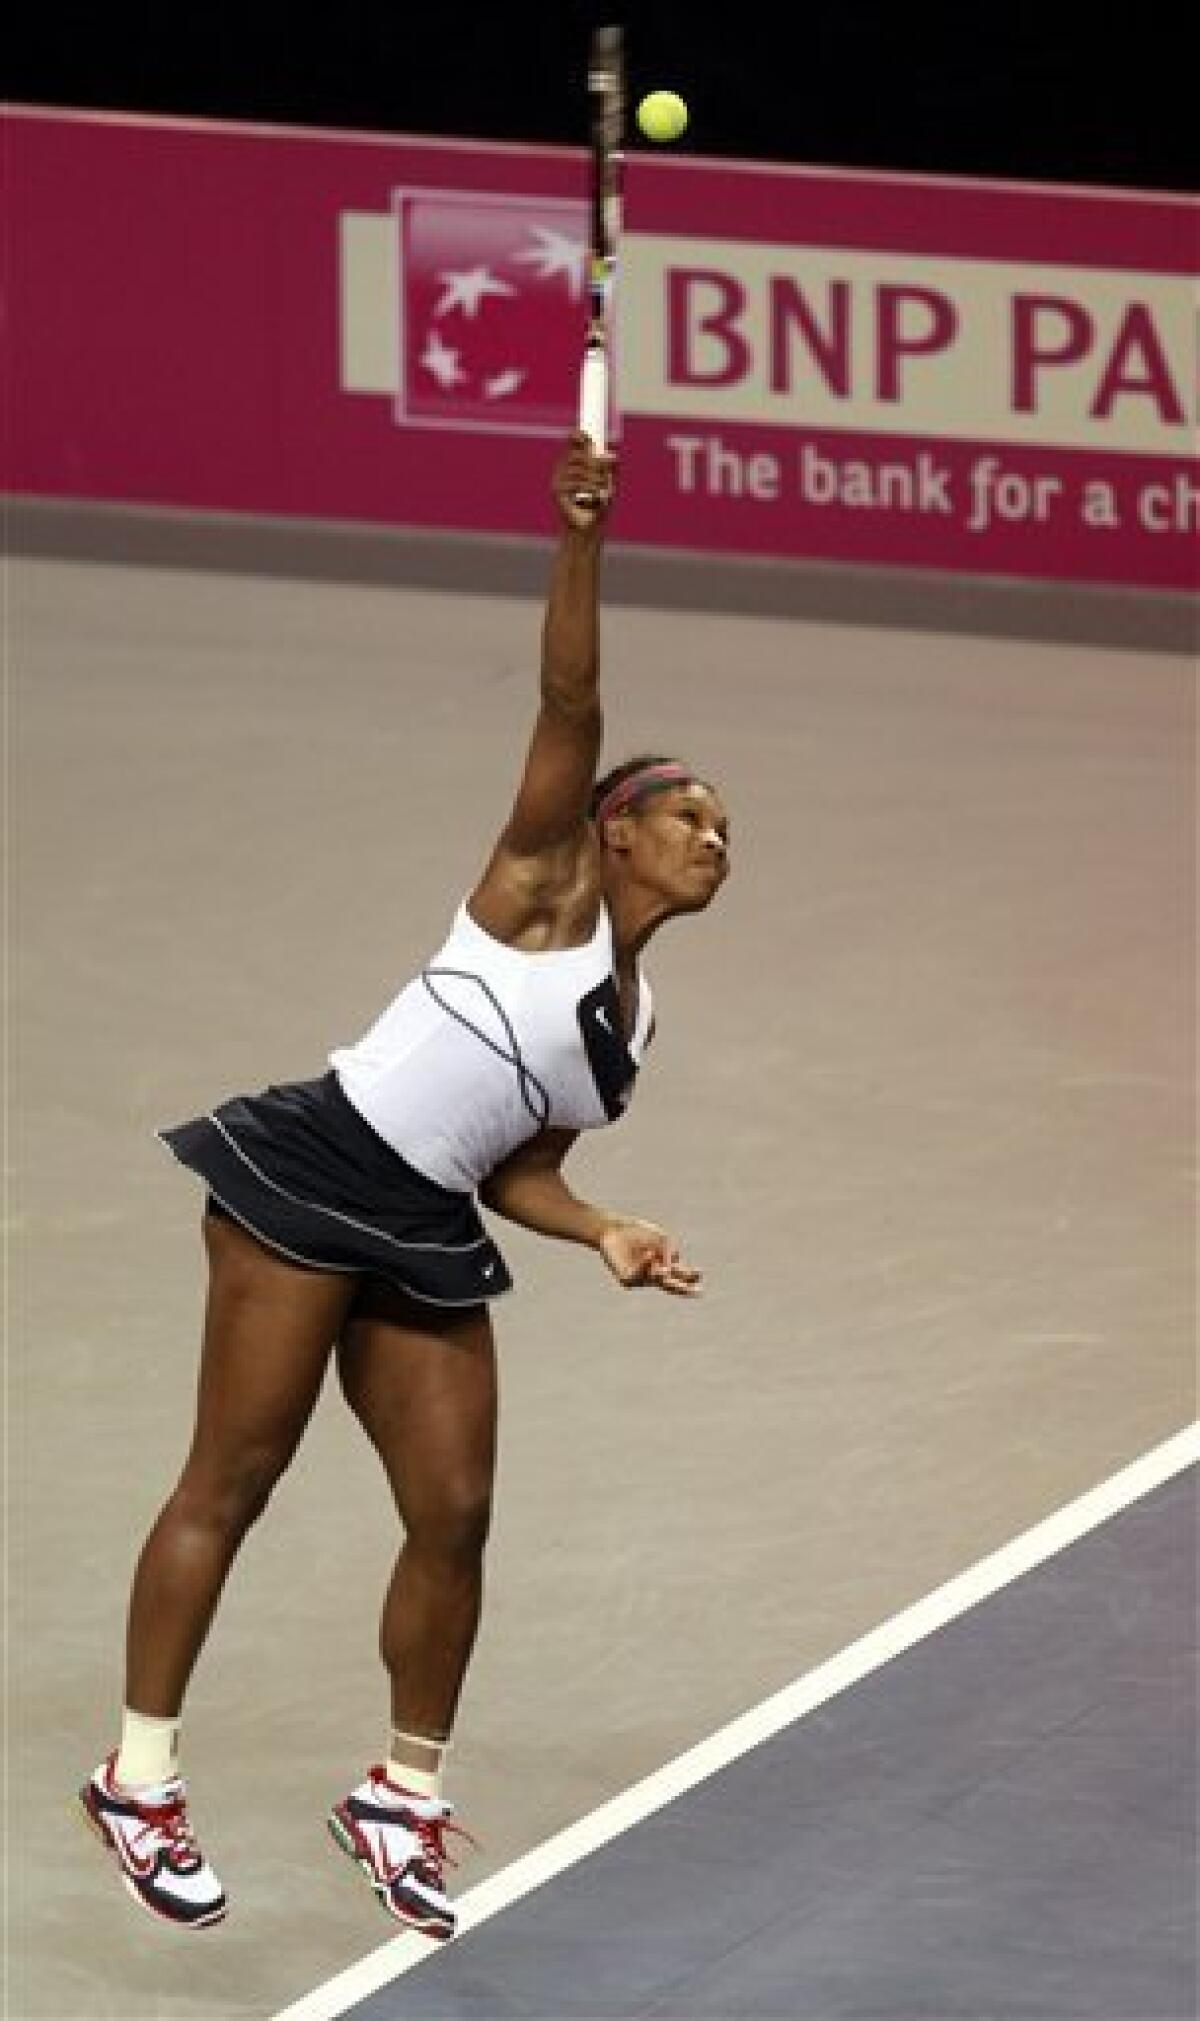 Serena Williams serves during a first-round Fed Cup tennis match against Anastasia Yakimova, of Belarus, in Worcester, Mass., Sunday, Feb. 5, 2012. (AP Photo/Steven Senne)